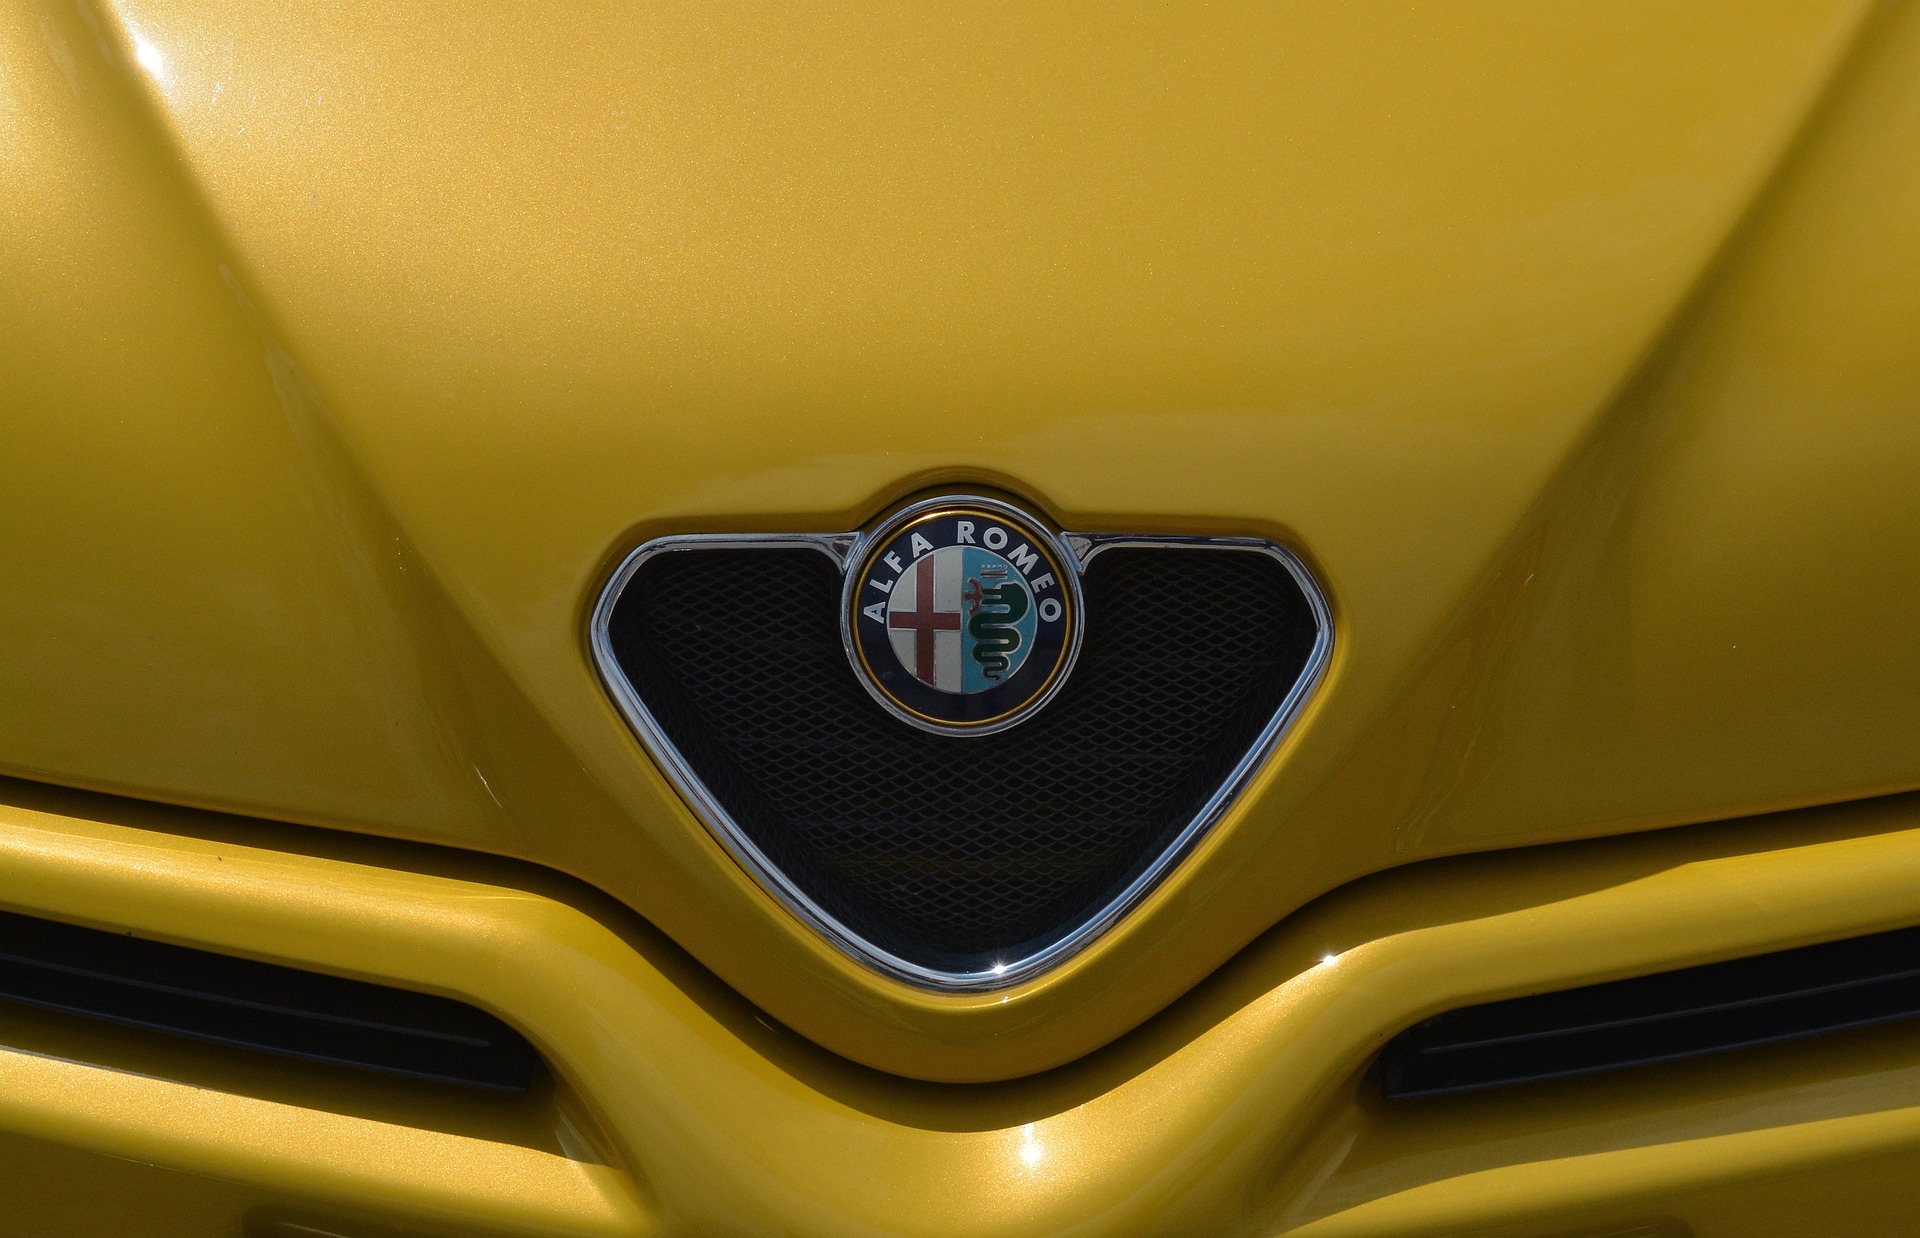 The front end of an Alfa Romeo vehicle, logo prominently displayed.